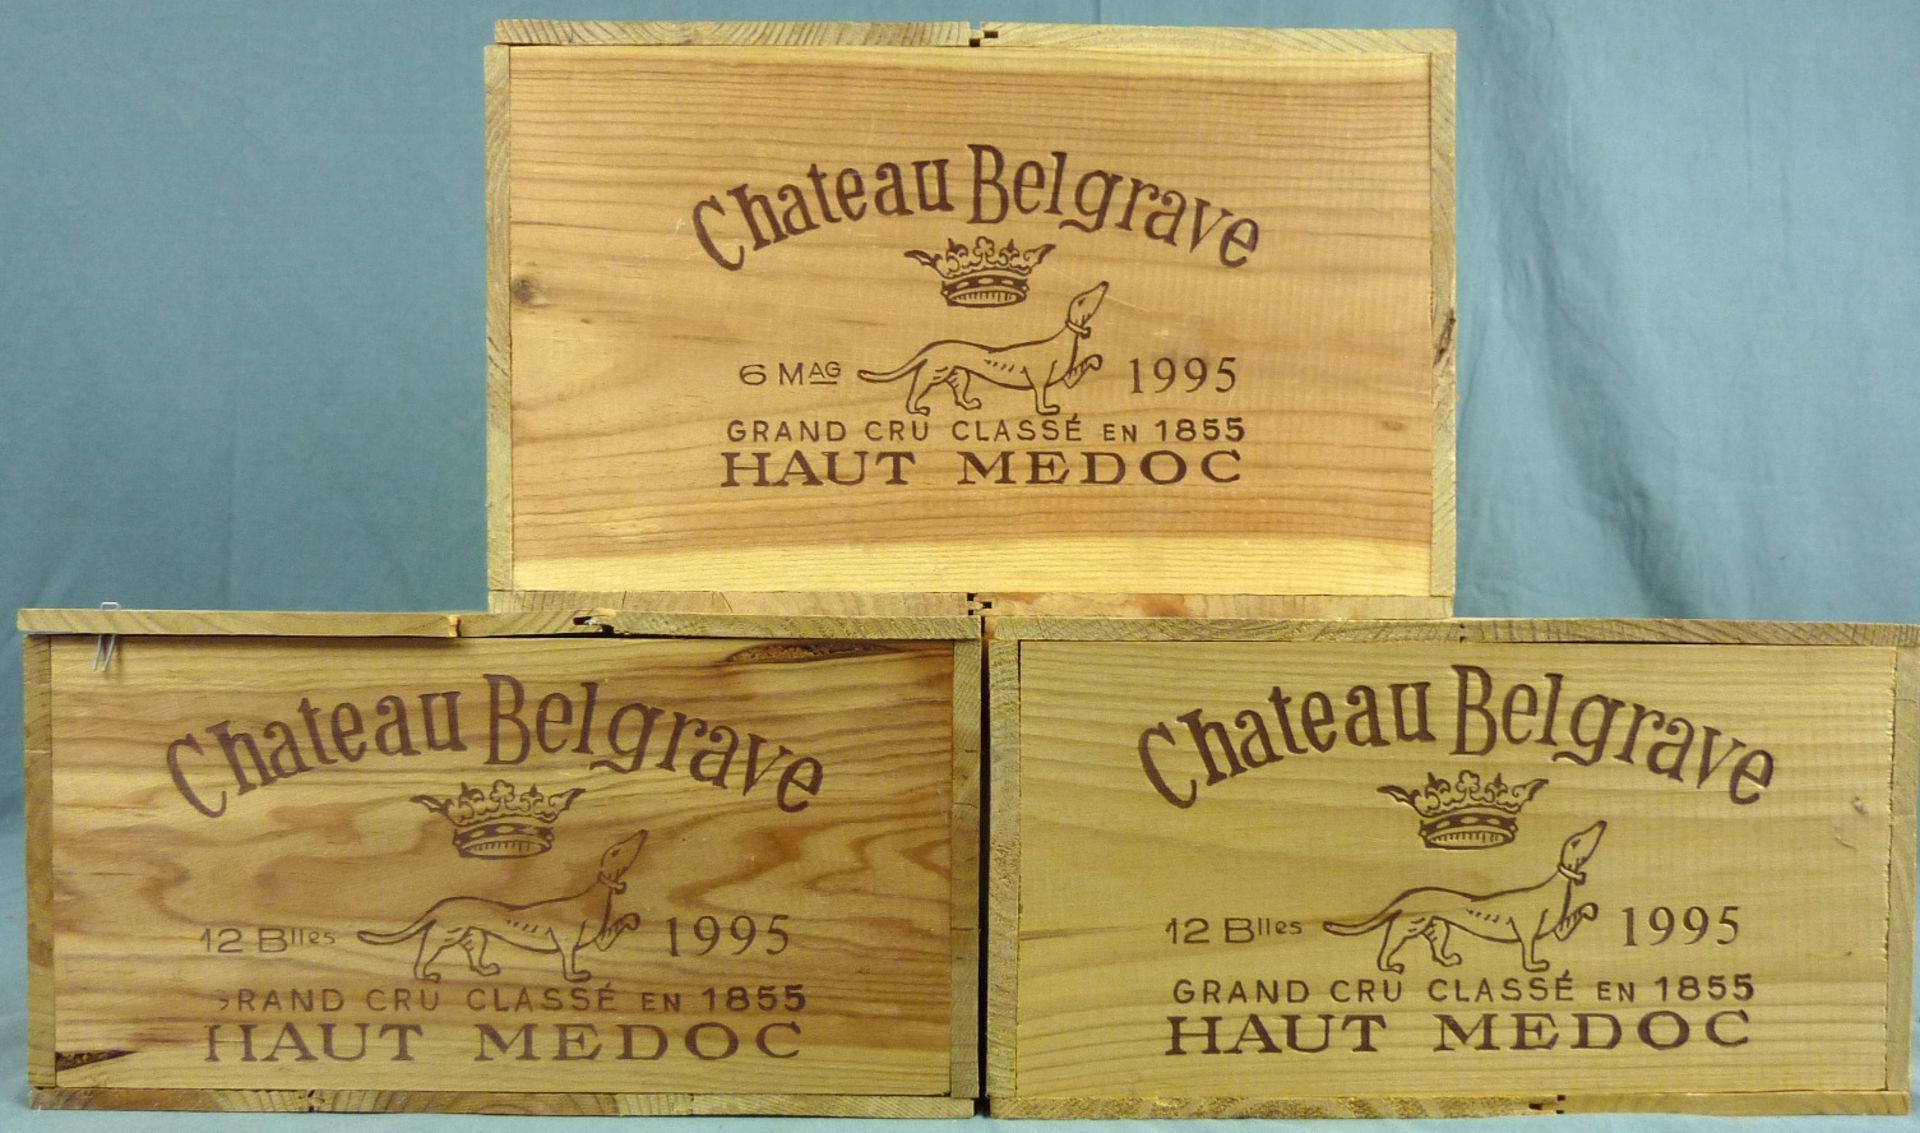 1995 Chateau Belgrave, Haut-Medoc, France.23 whole bottles of 75 cl and 6 magnums of 150 cl, each